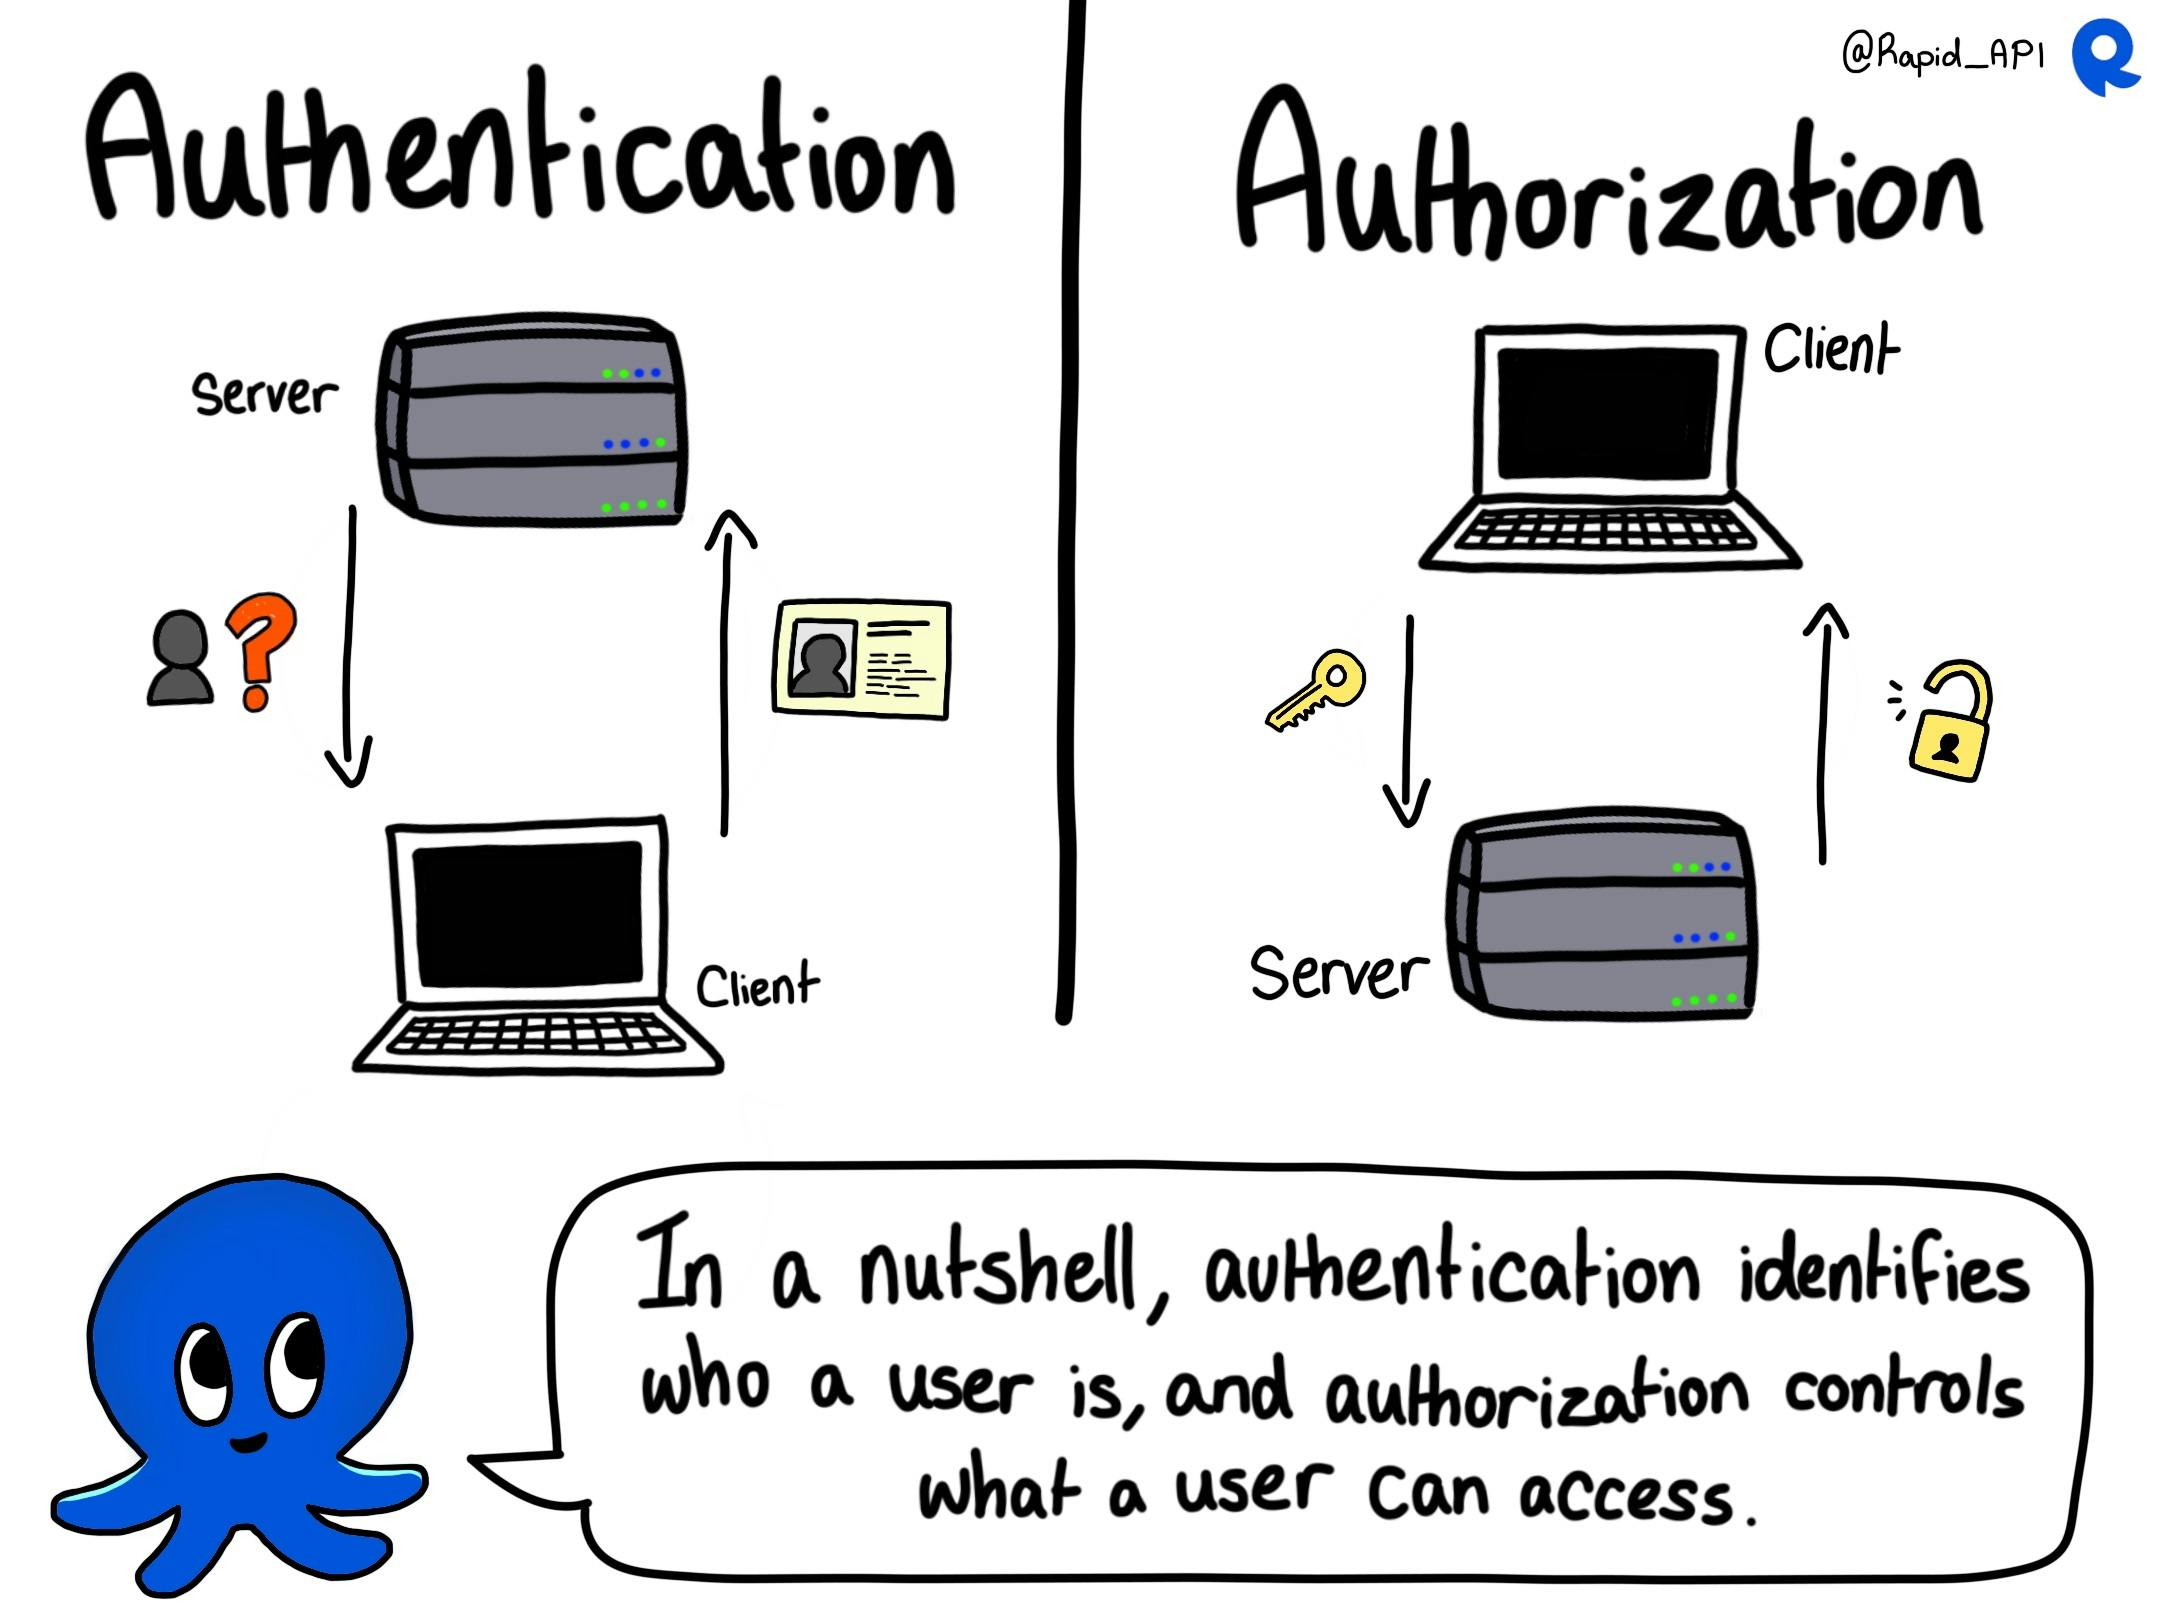 The difference between Authentication and Authorization